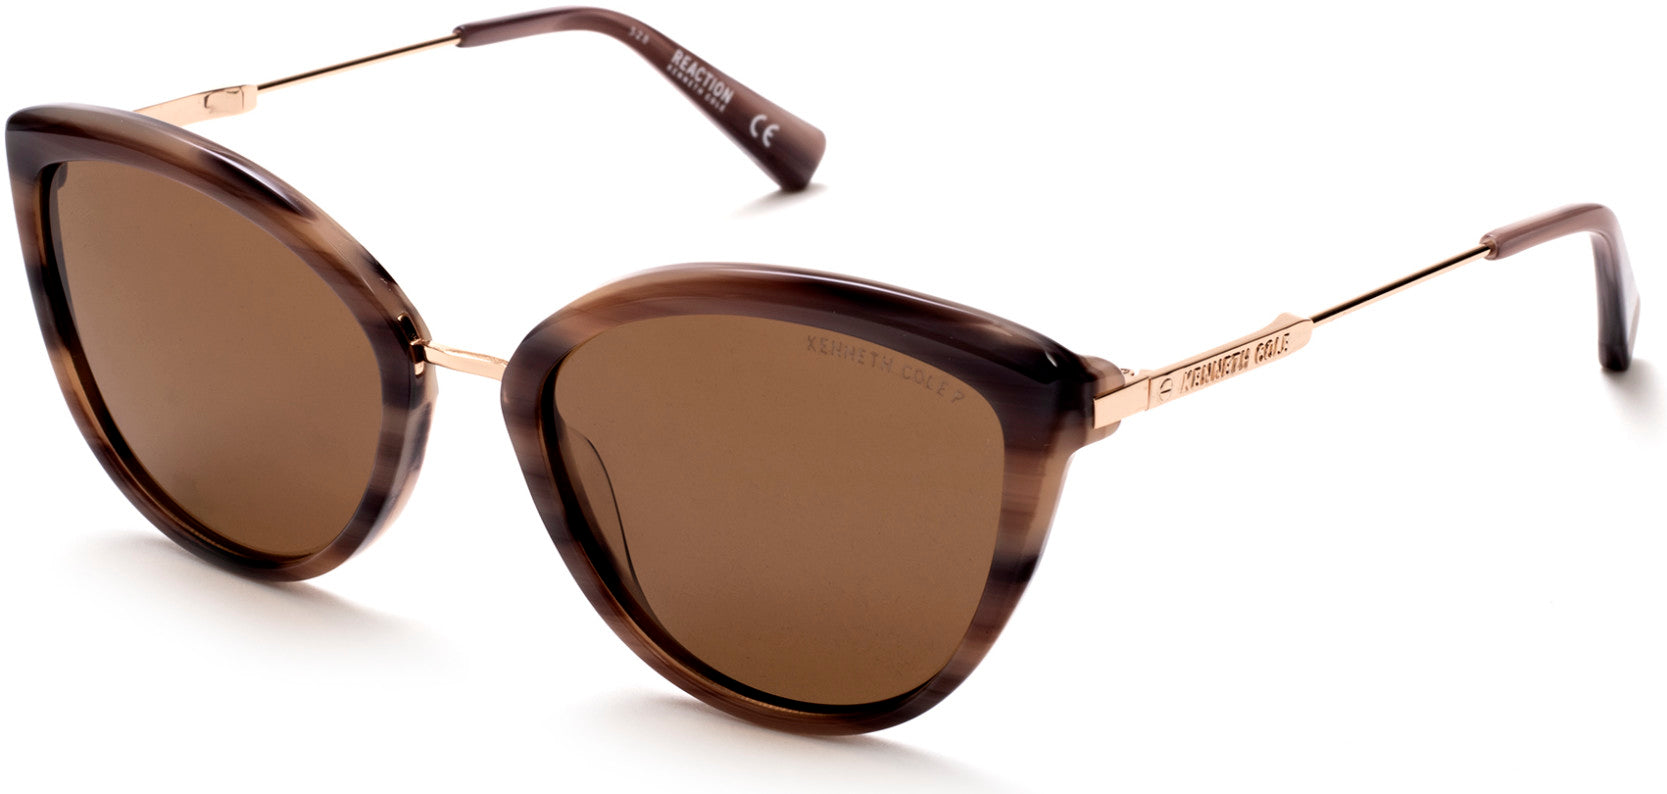 Kenneth Cole New York,Kenneth Cole Reaction KC7236 Cat Sunglasses 72H-72H - Shiny Pink / Brown Polarized Lenses